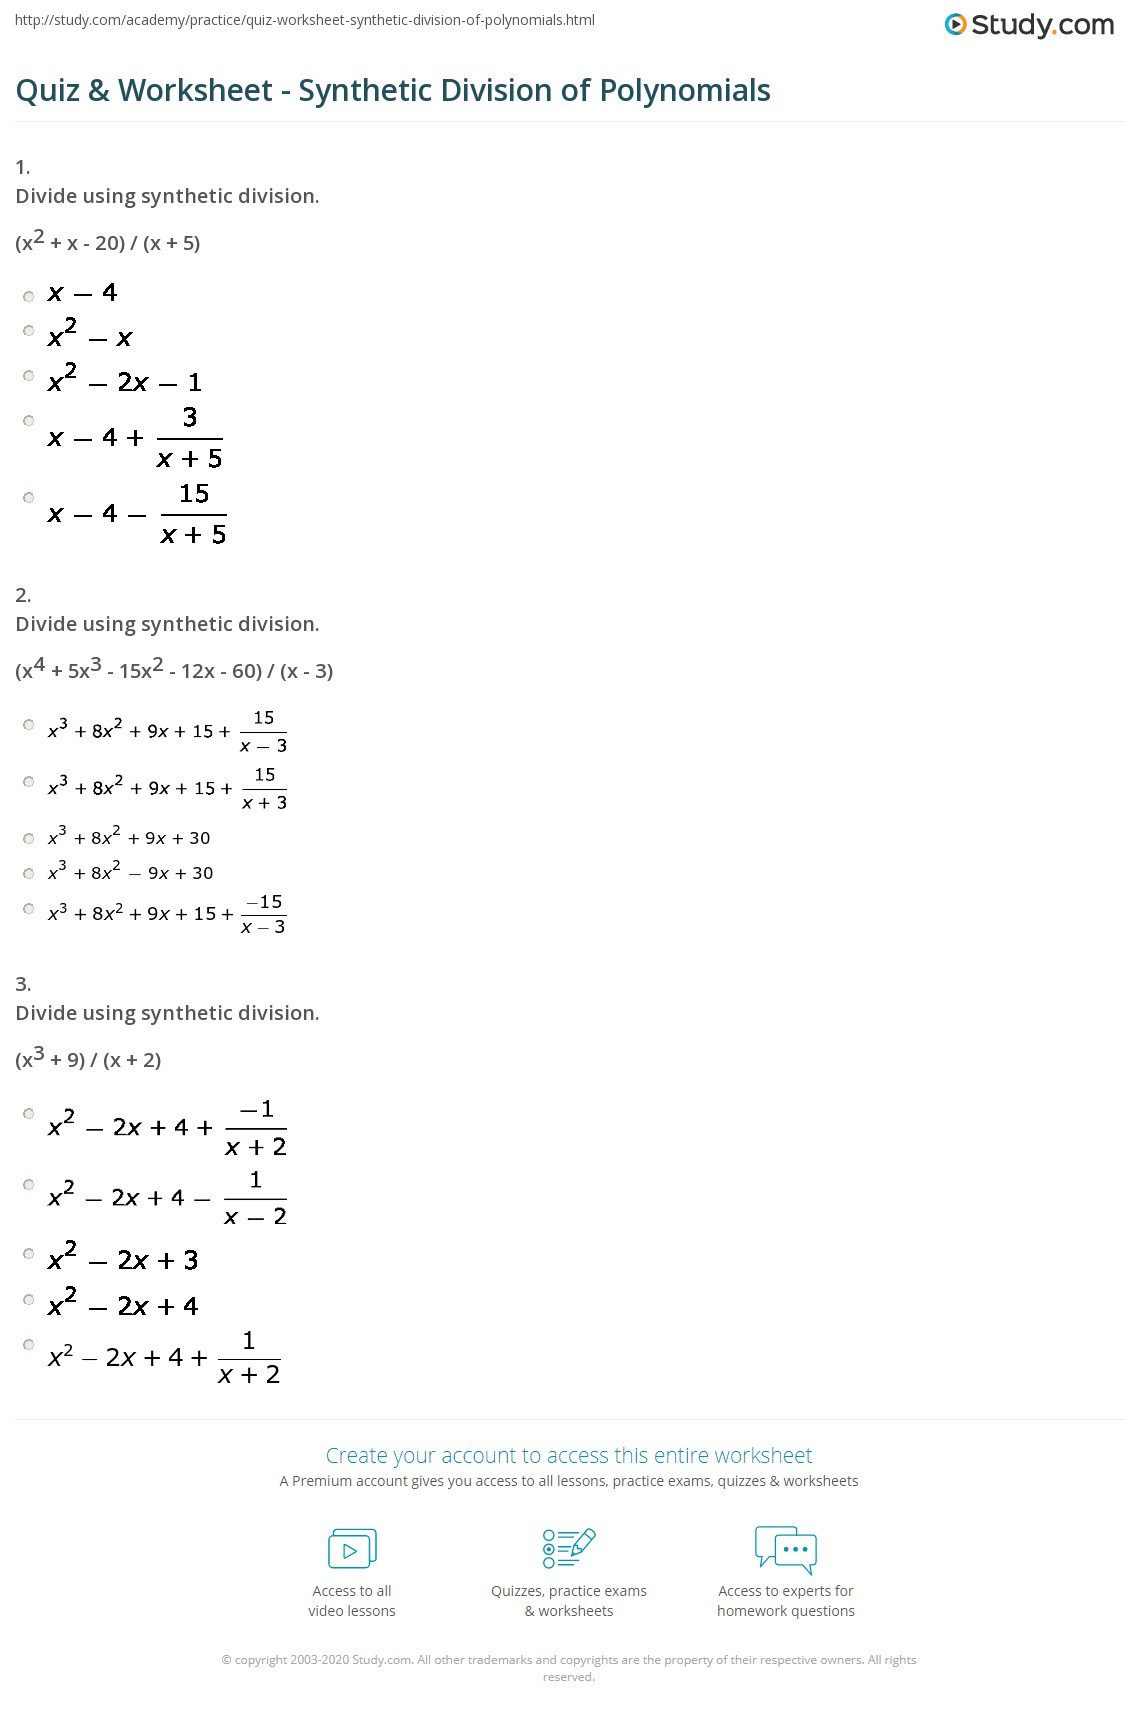 quiz worksheet synthetic division of polynomials study